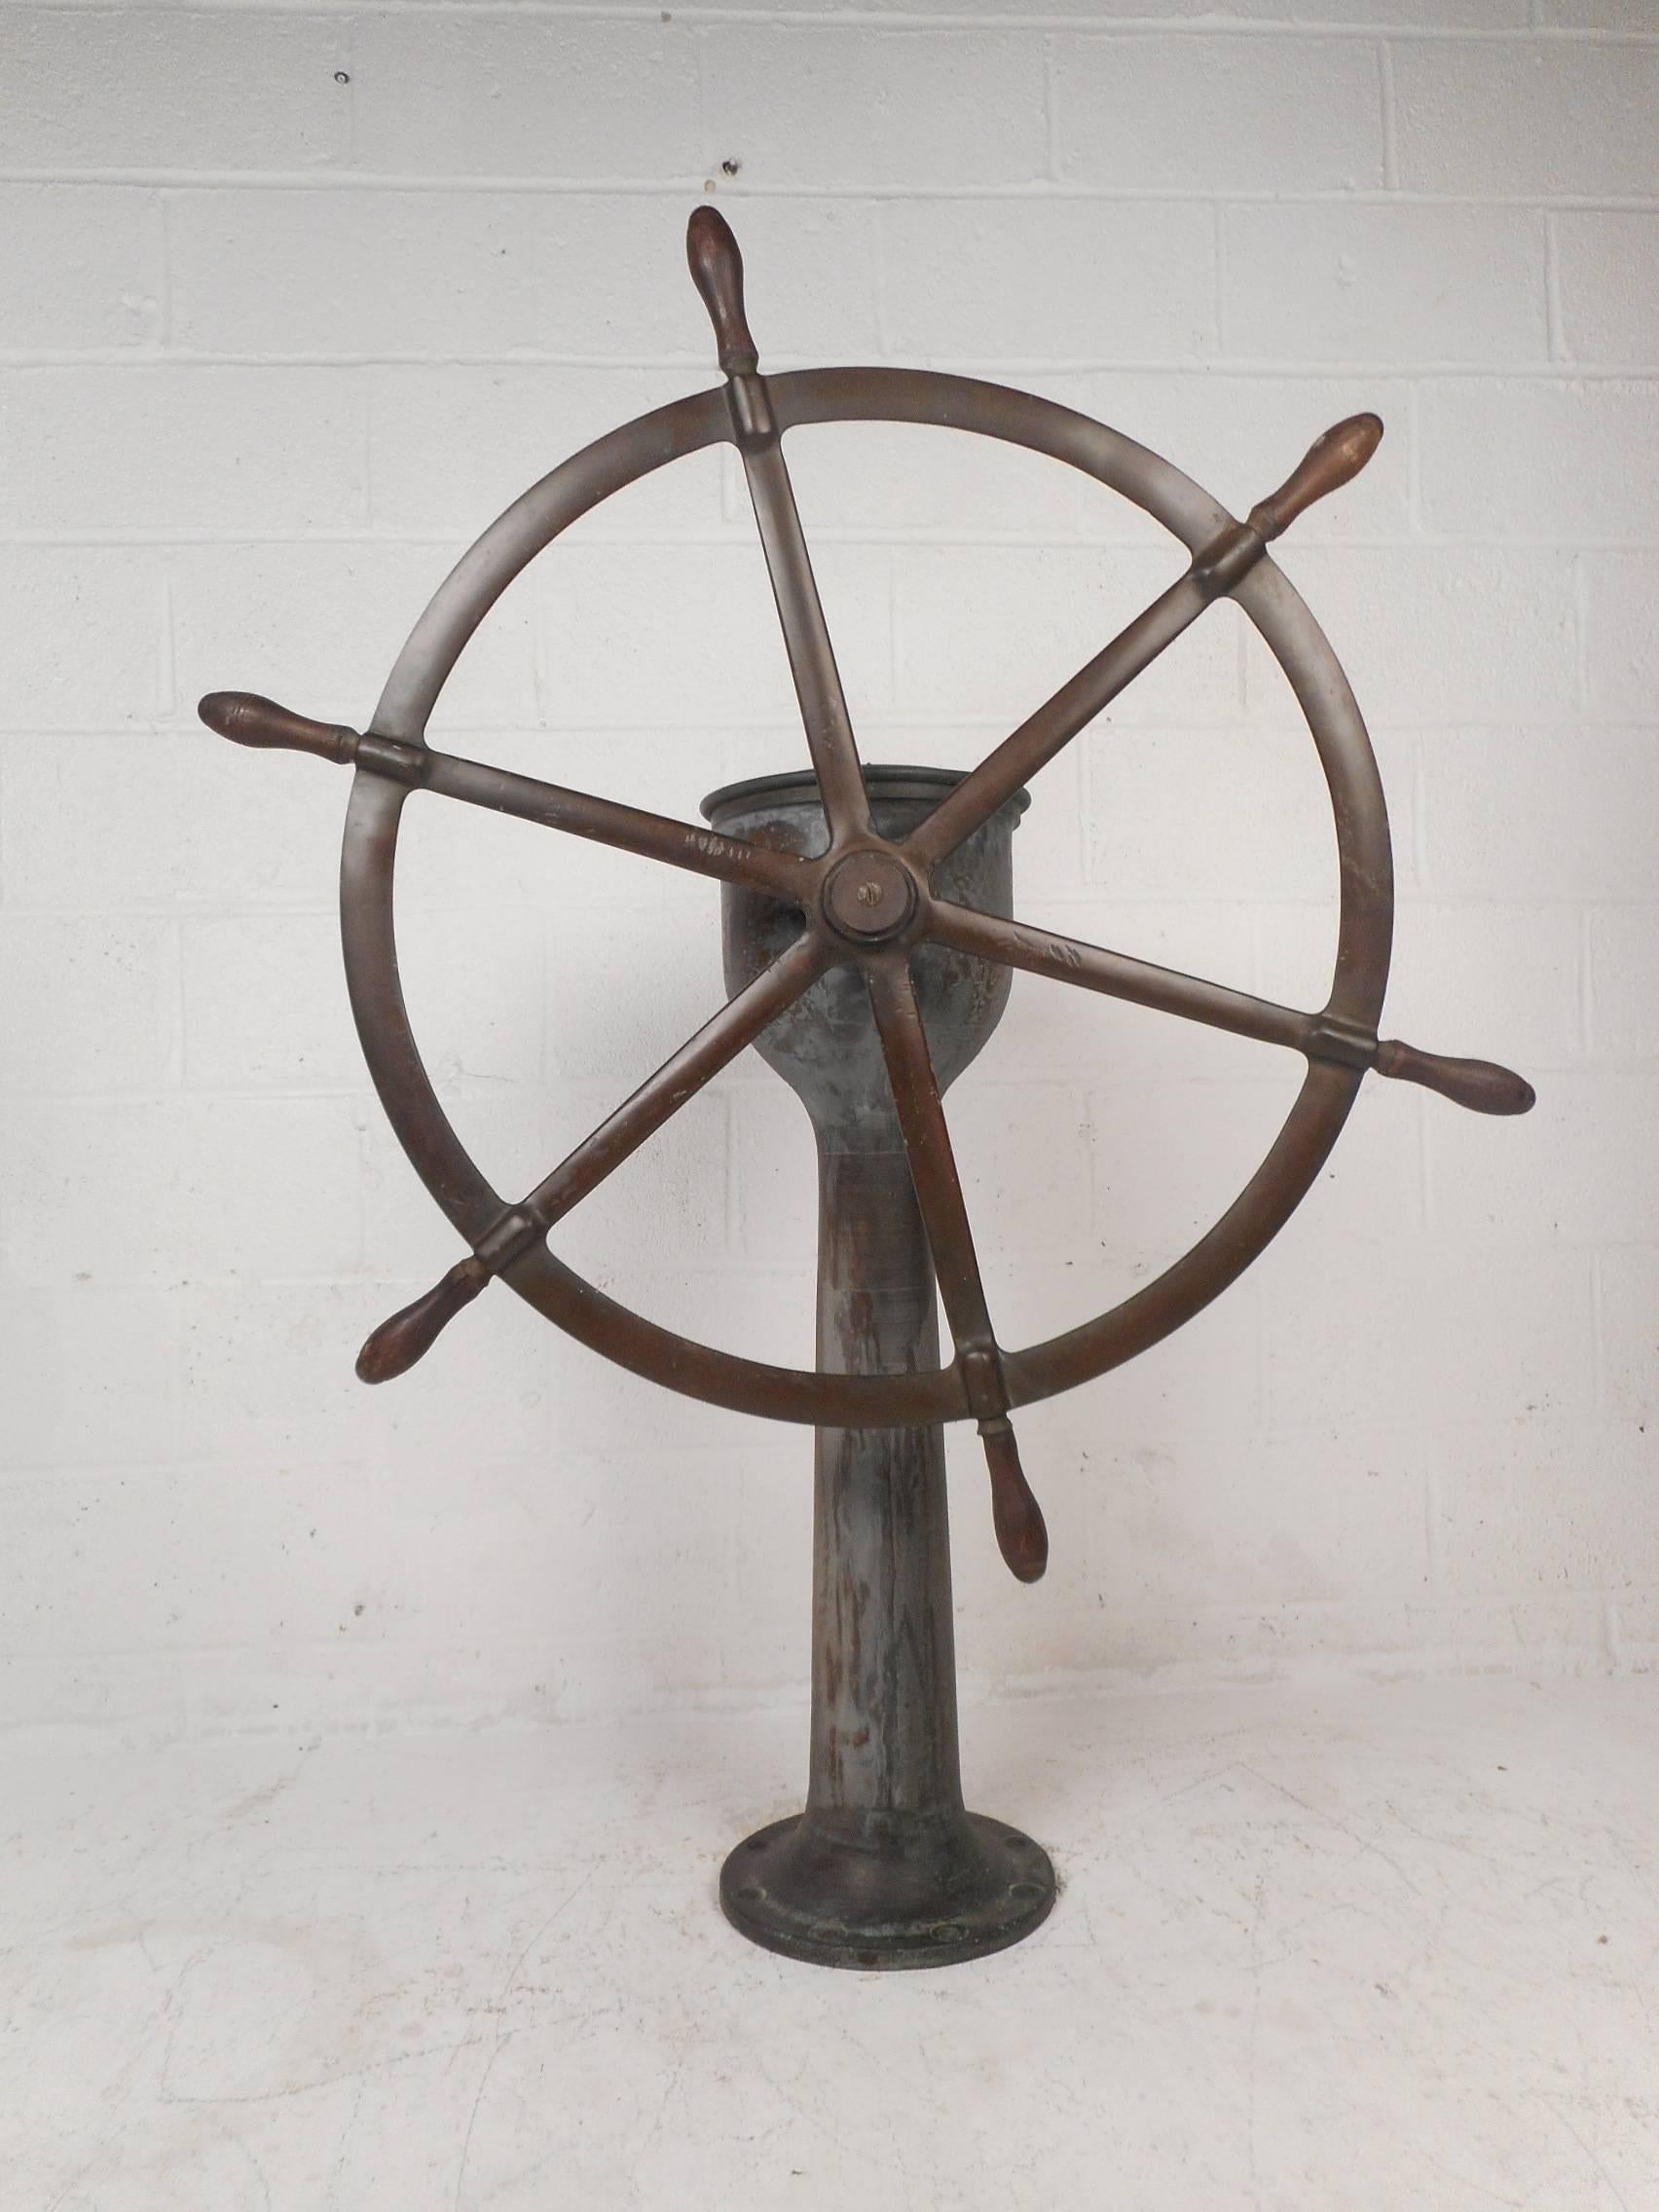 This stunning vintage steering station has a solid brass wheel with wooden handles and a bronze base. True quality construction labelled, 